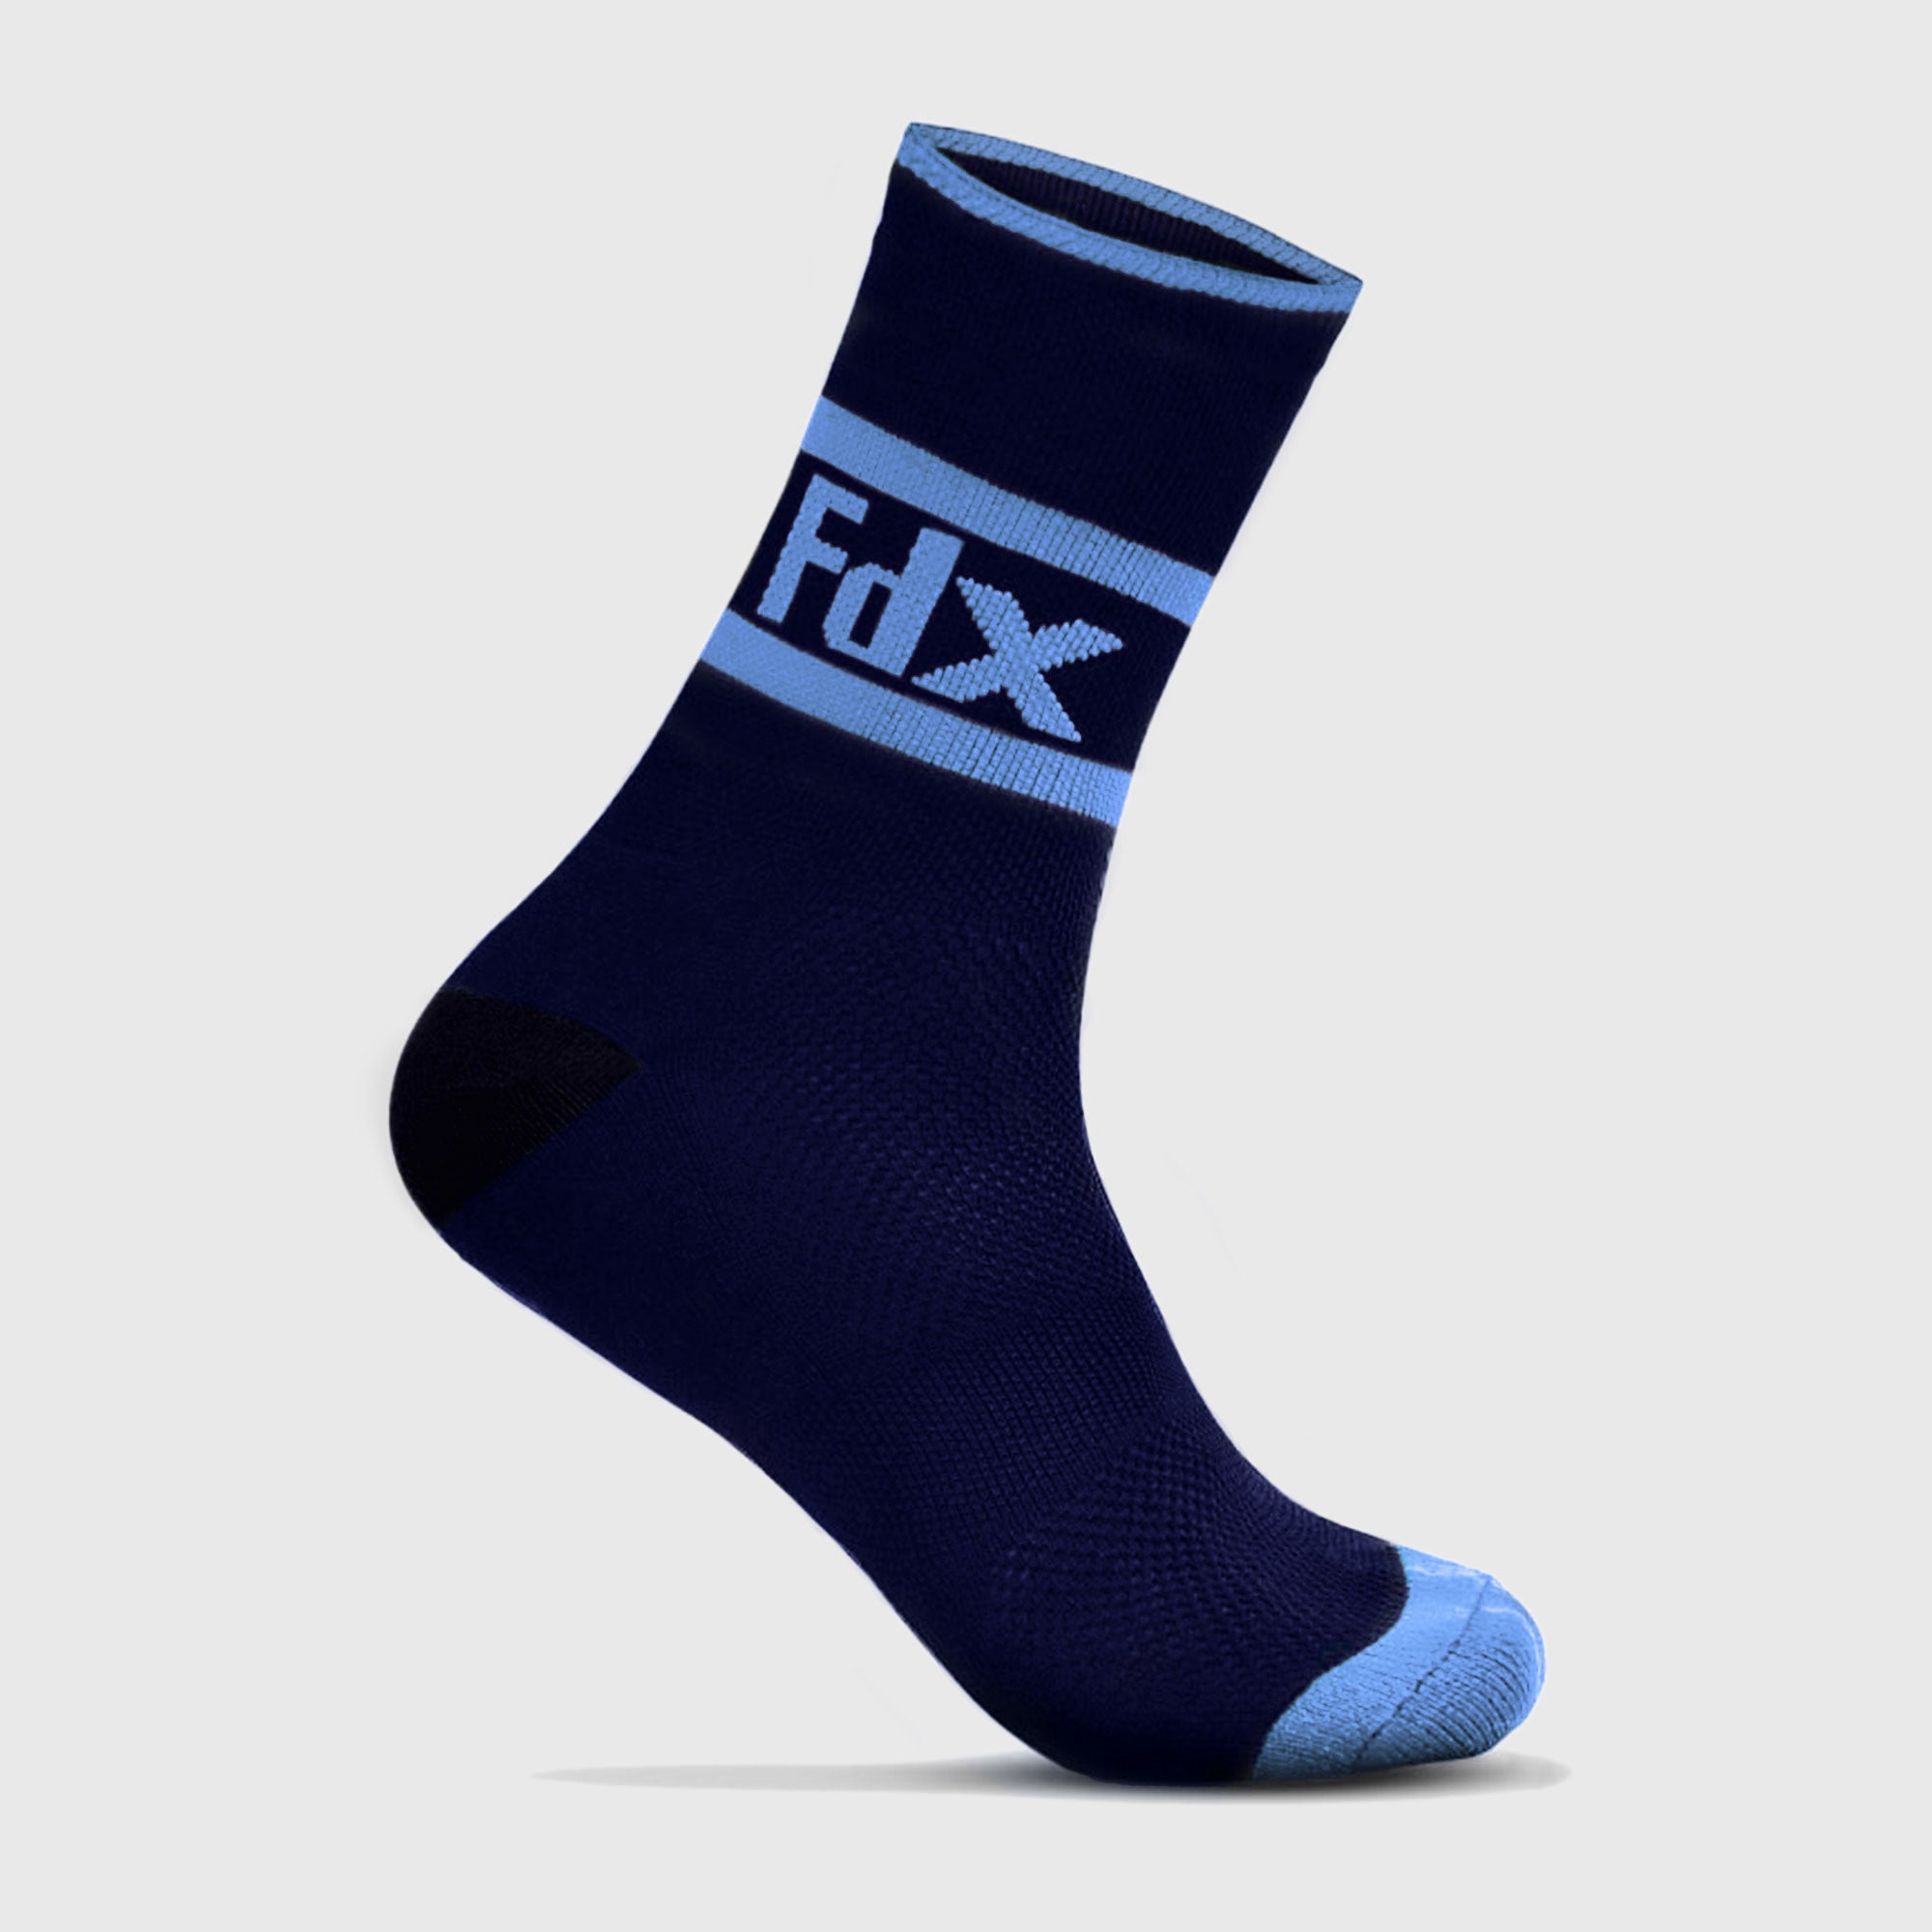 Fdx Navy Blue Compression Socks for Cycling & Running